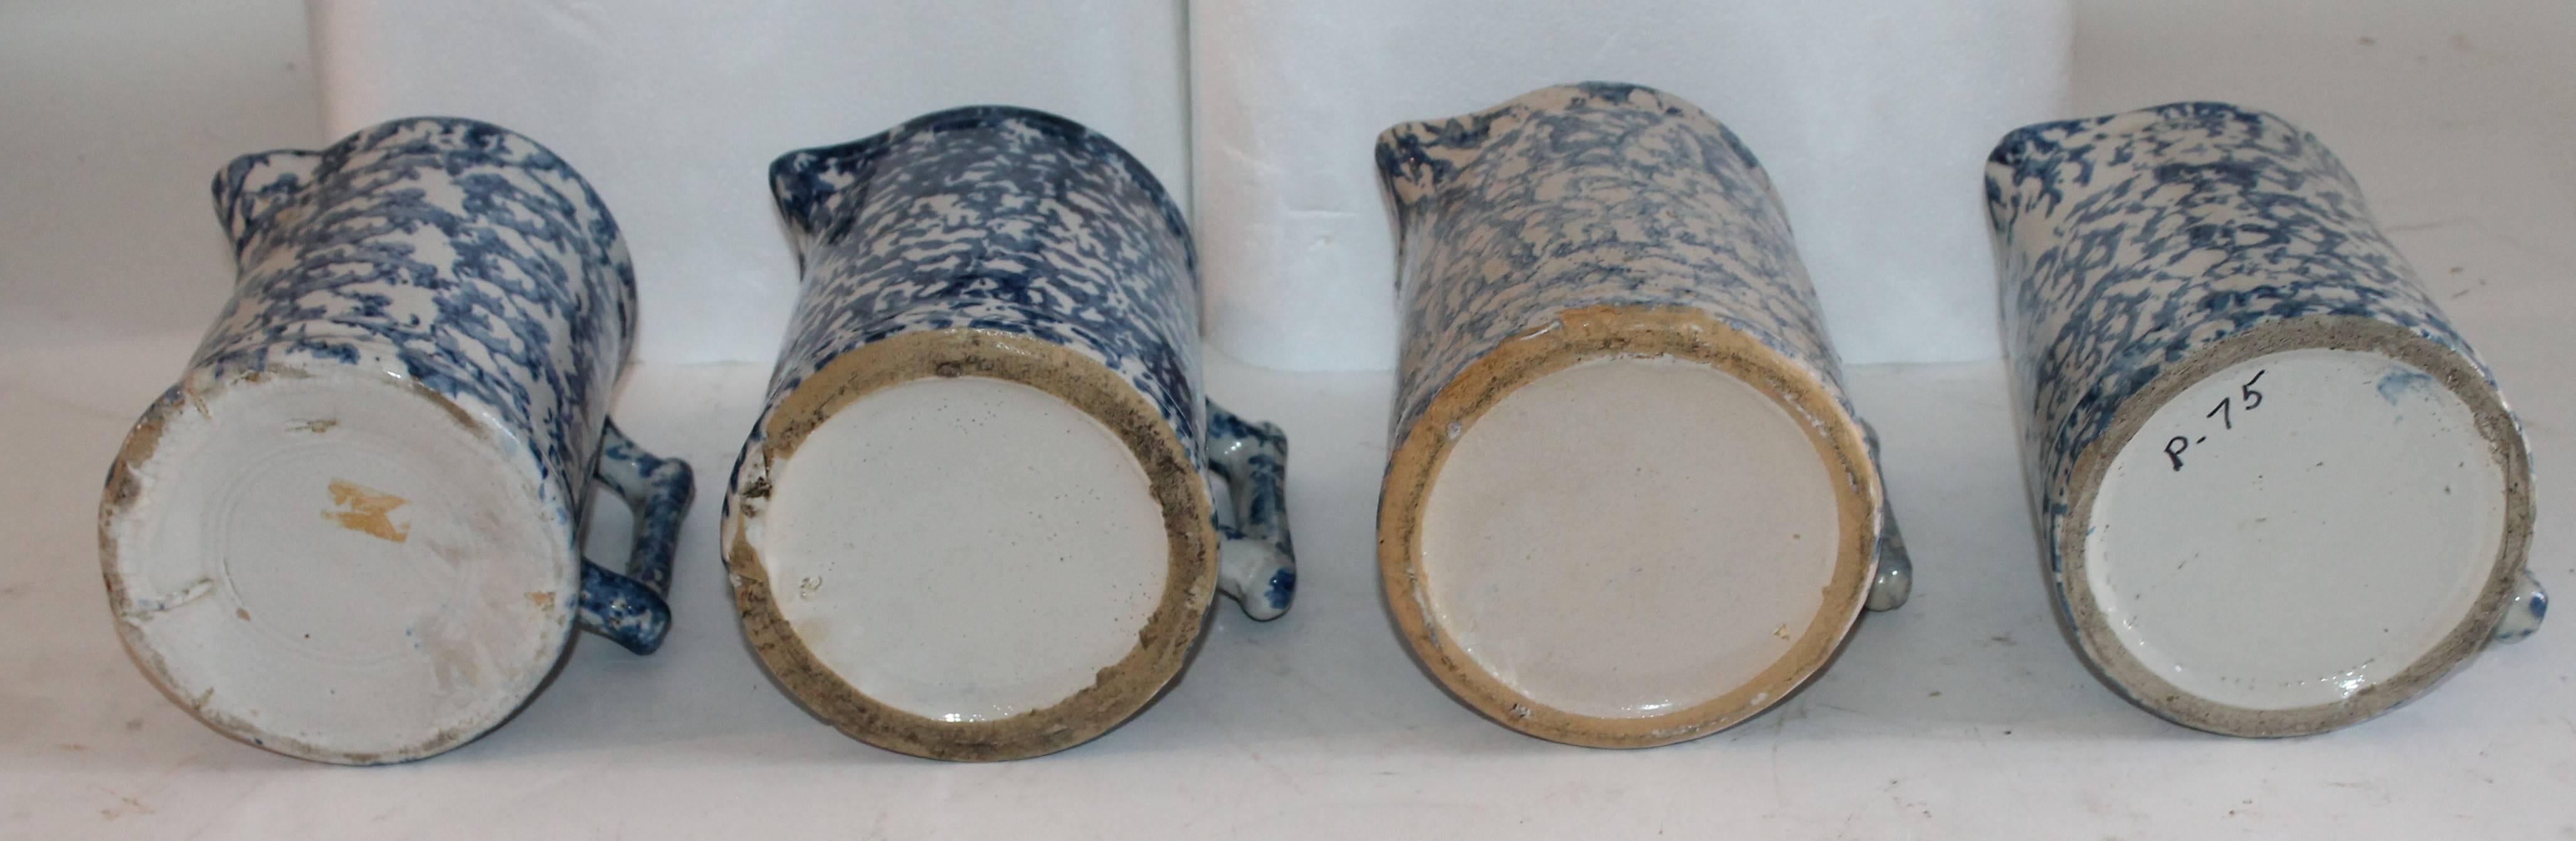 Hand-Crafted 19th Century Sponge Ware Collection of Eight Pottery Pitchers